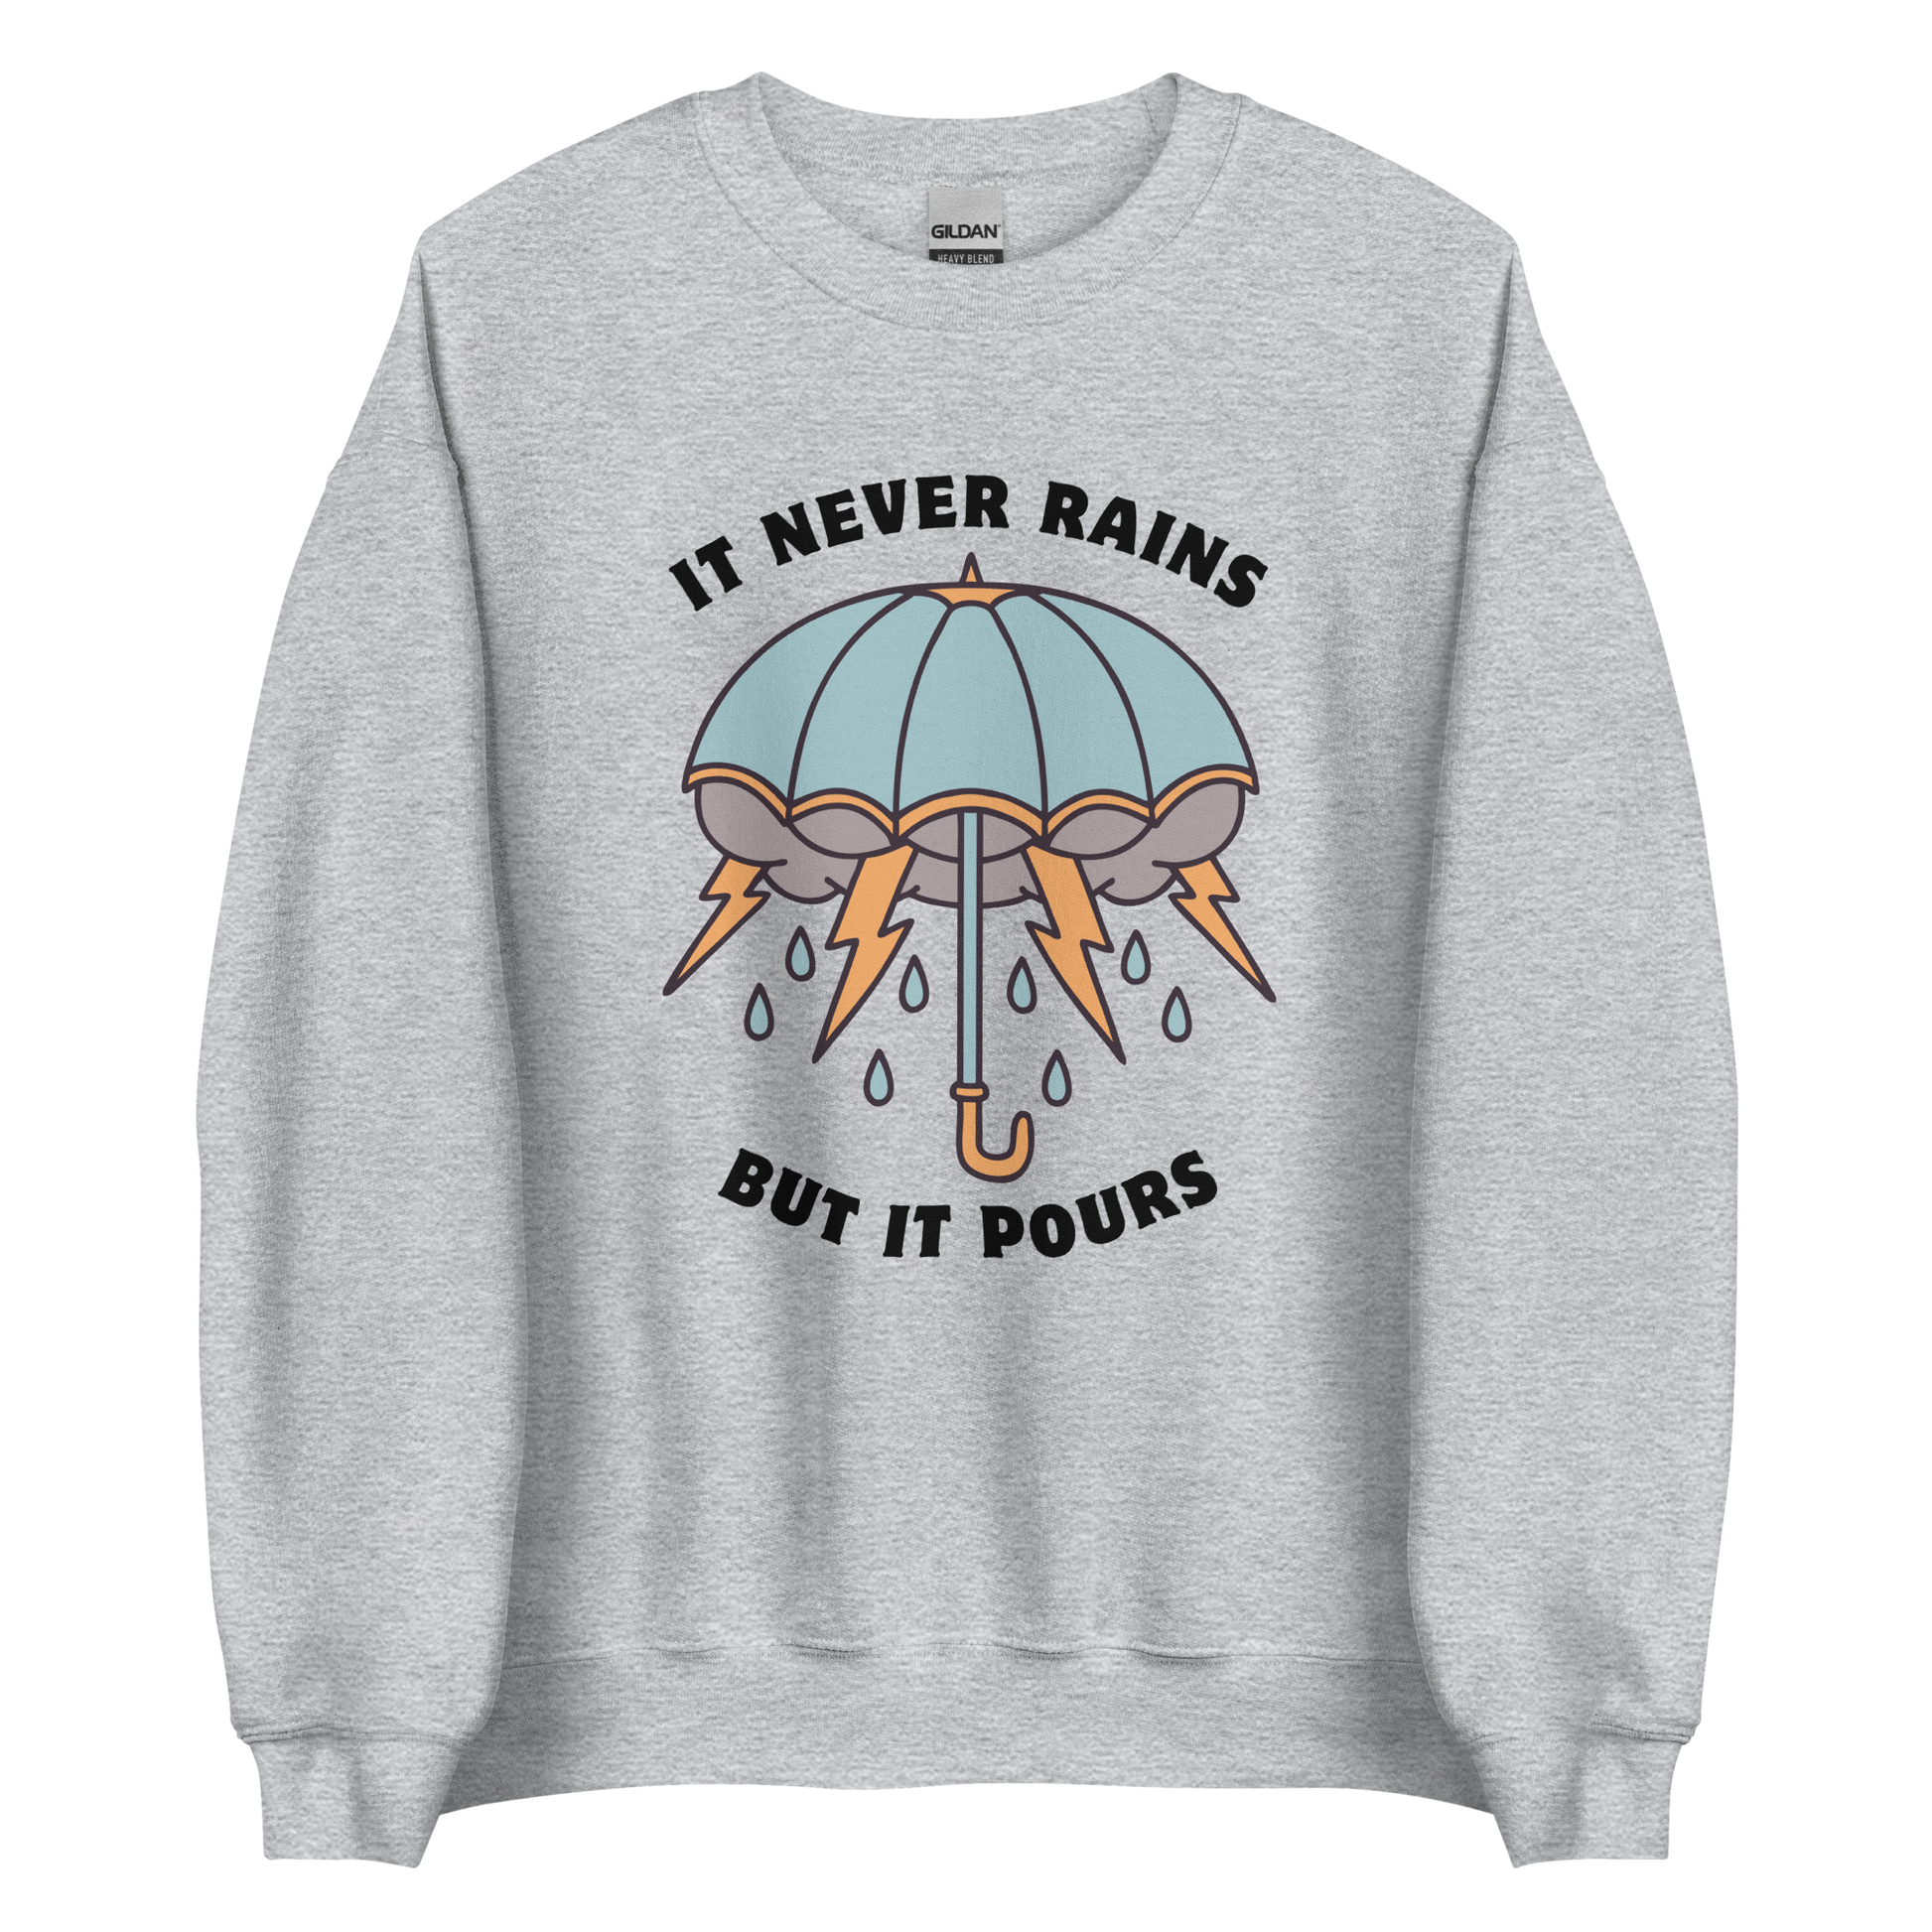 Sport Grey Umbrella Sweatshirt featuring a unique It Never Rains But It Pours graphic on the chest - Cool Tattoo-Inspired Graphic Umbrella Sweatshirts - Boozy Fox